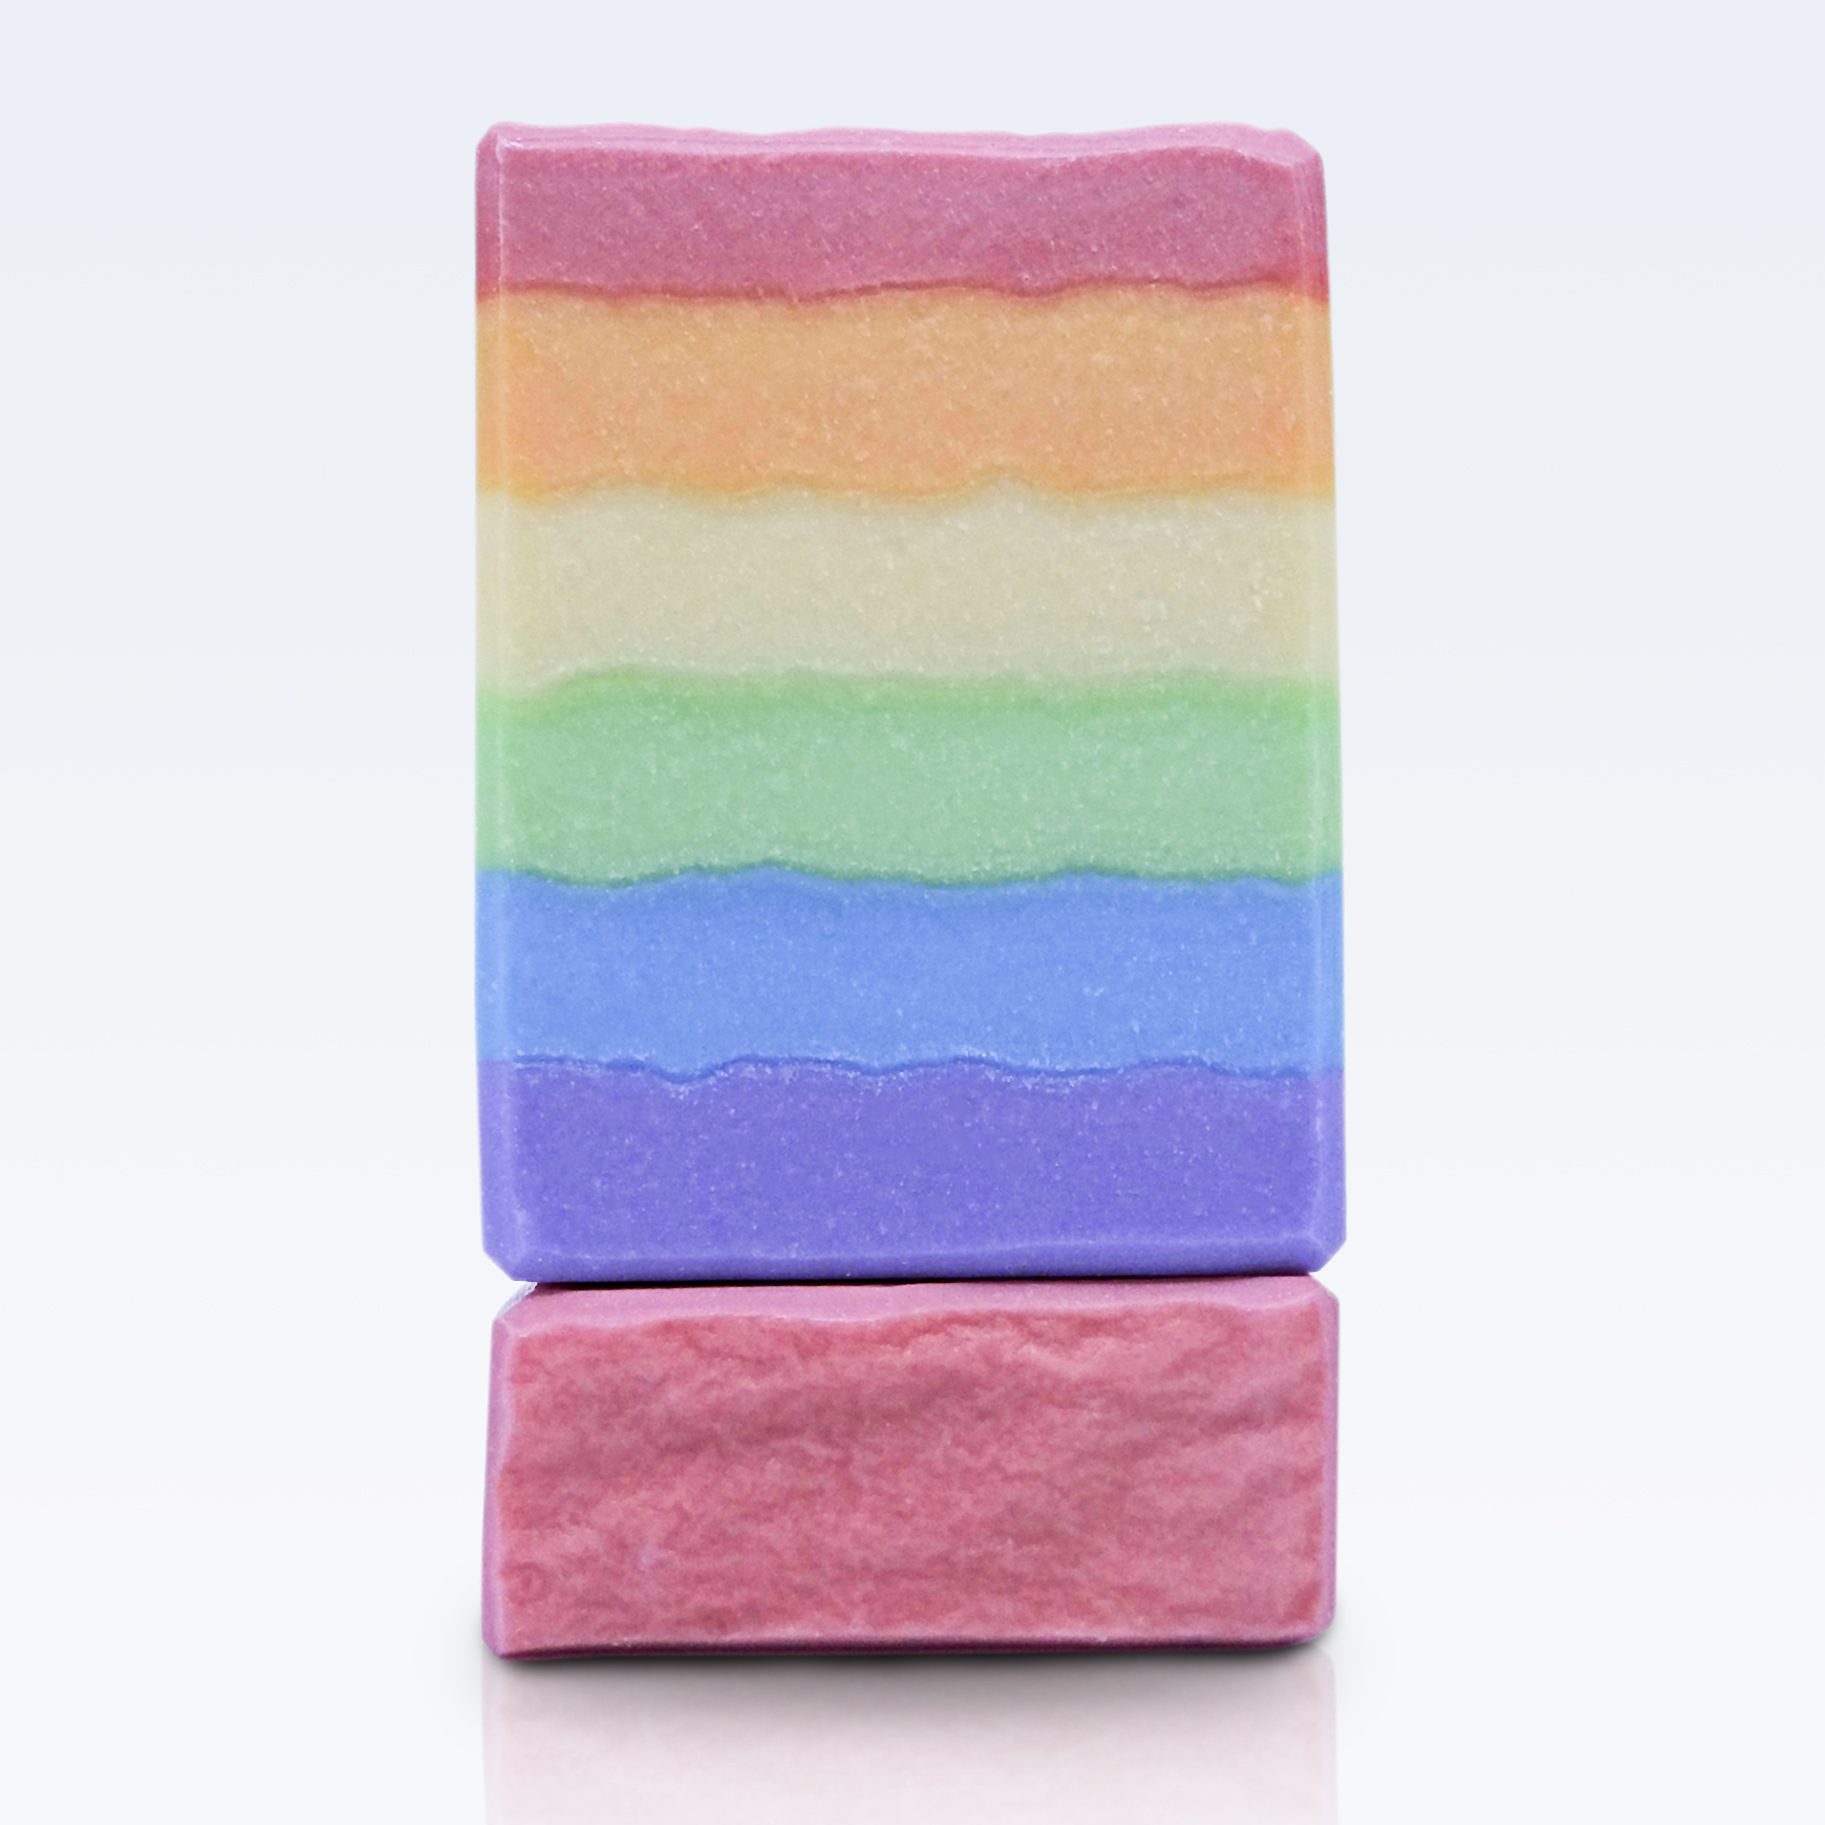 Single Rainbow handmade soap by Tubby Tabby Soaps (unscented, natural, kid friendly, also available as a double rainbow)